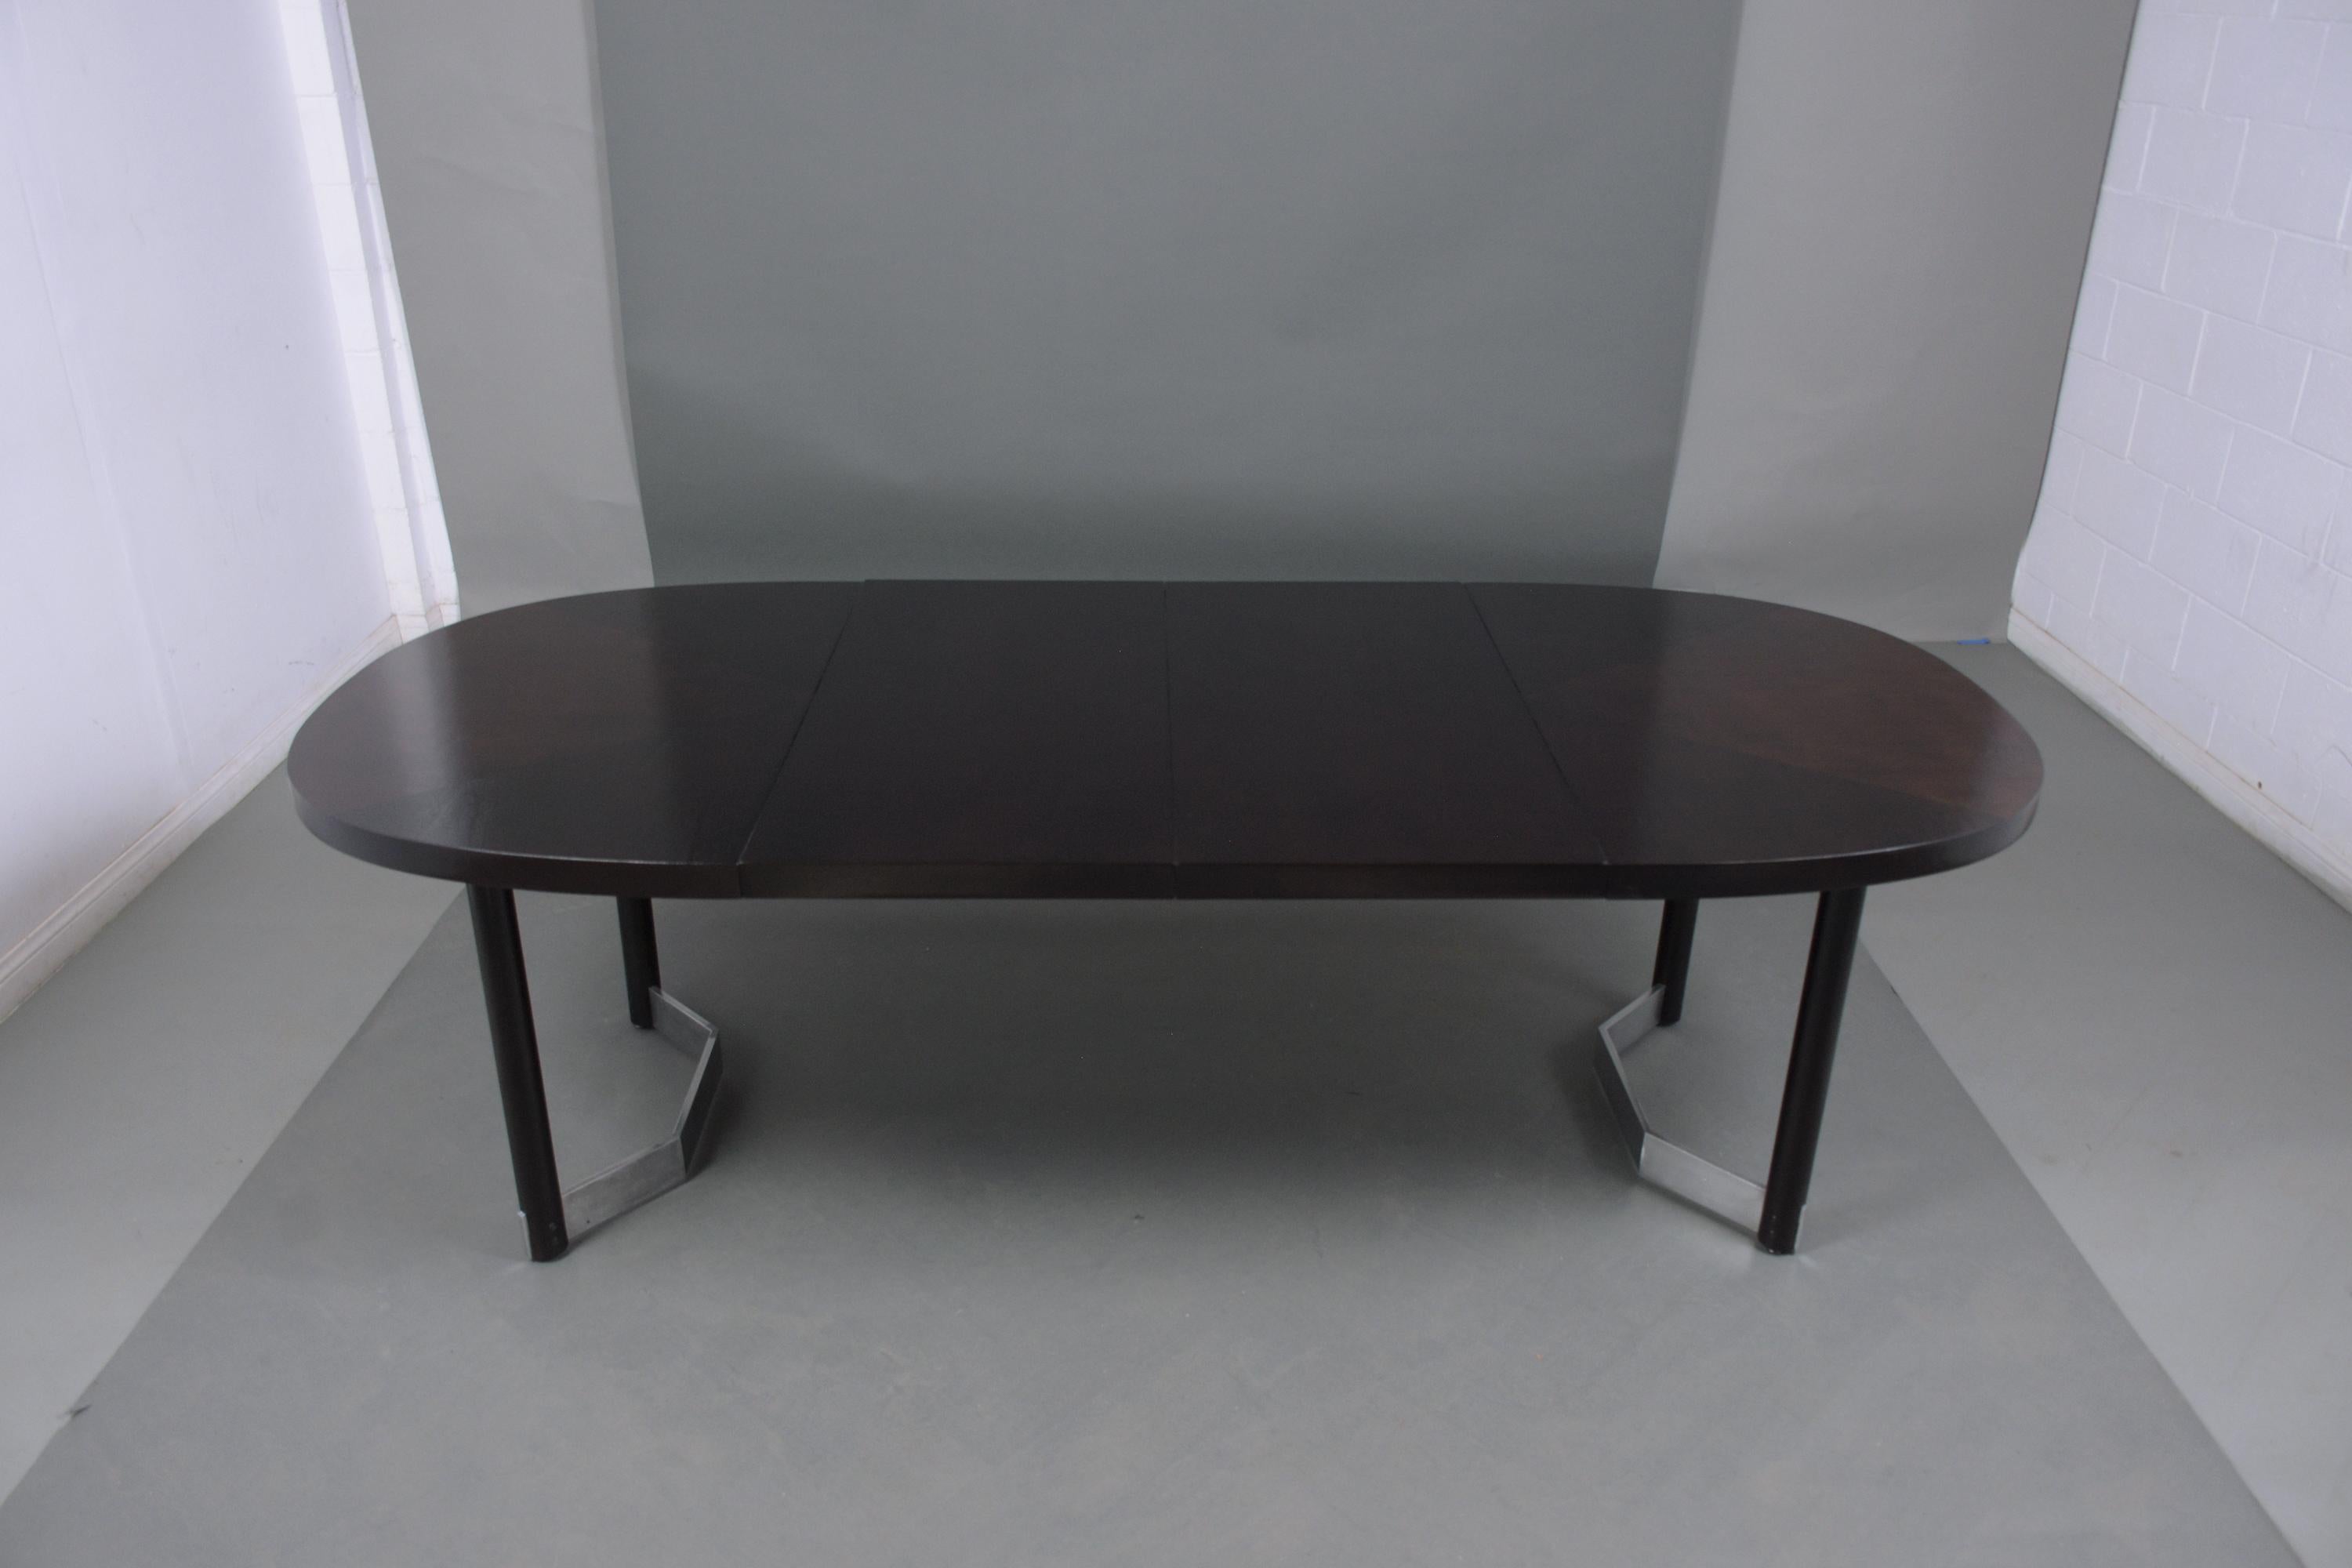 An extraordinary modern dining room table crafted out of mahogany wood professionally restored by our team of craftsmen. This mid-century extendable table features an oval top that comes with two leaves each 20